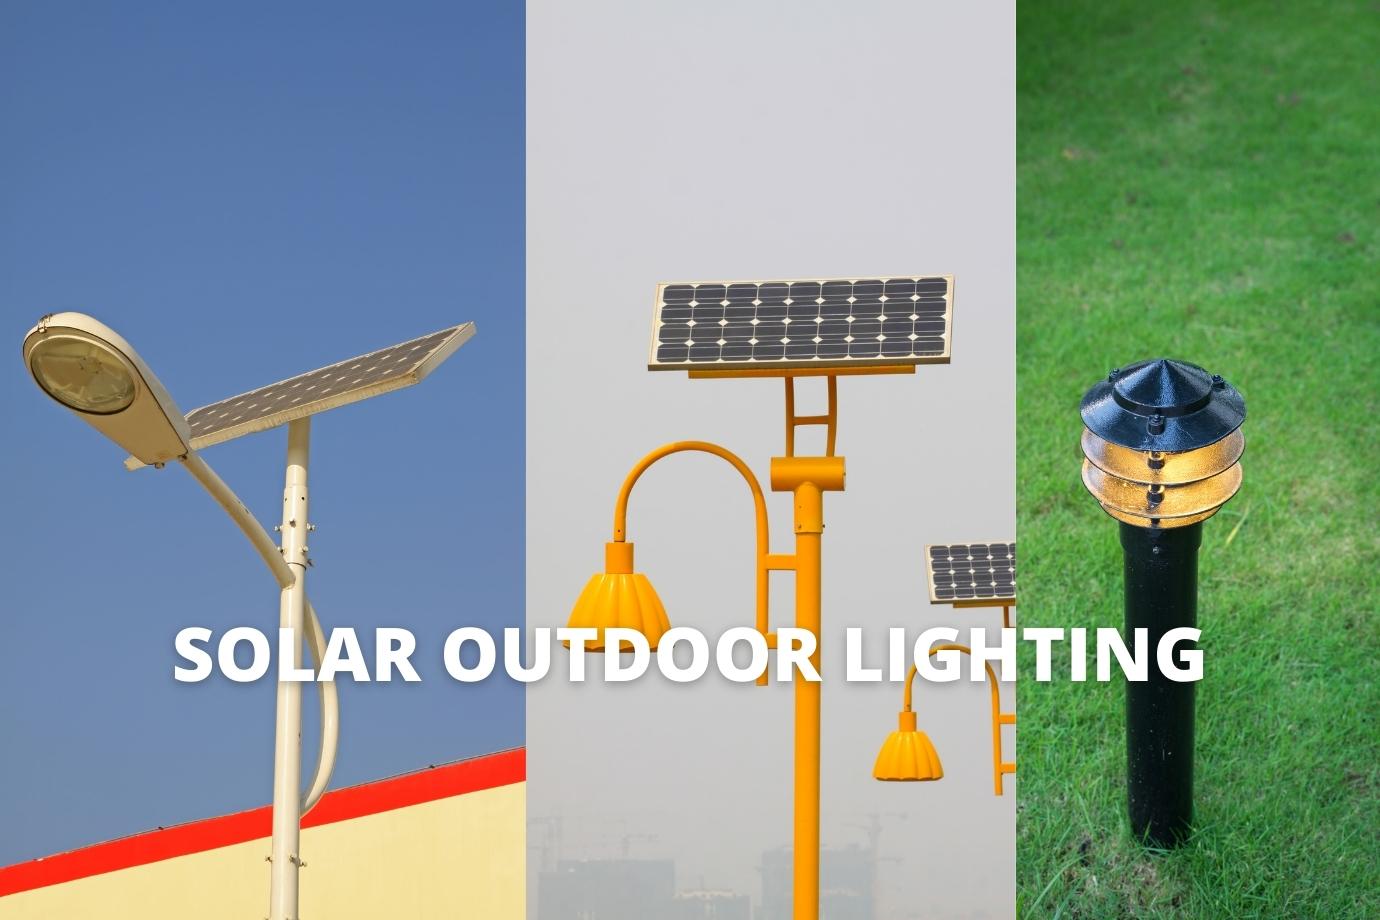 Should You Use Solar Outdoor Lighting for Your Yard? Solar lights make a great addition to your landscape, especially if you want to draw your guests’ attention to a garden feature or highlight the exteriors at night. These lights can illuminate your driveways and walkways. Not only are they affordable, but solar lighting is easy to install.